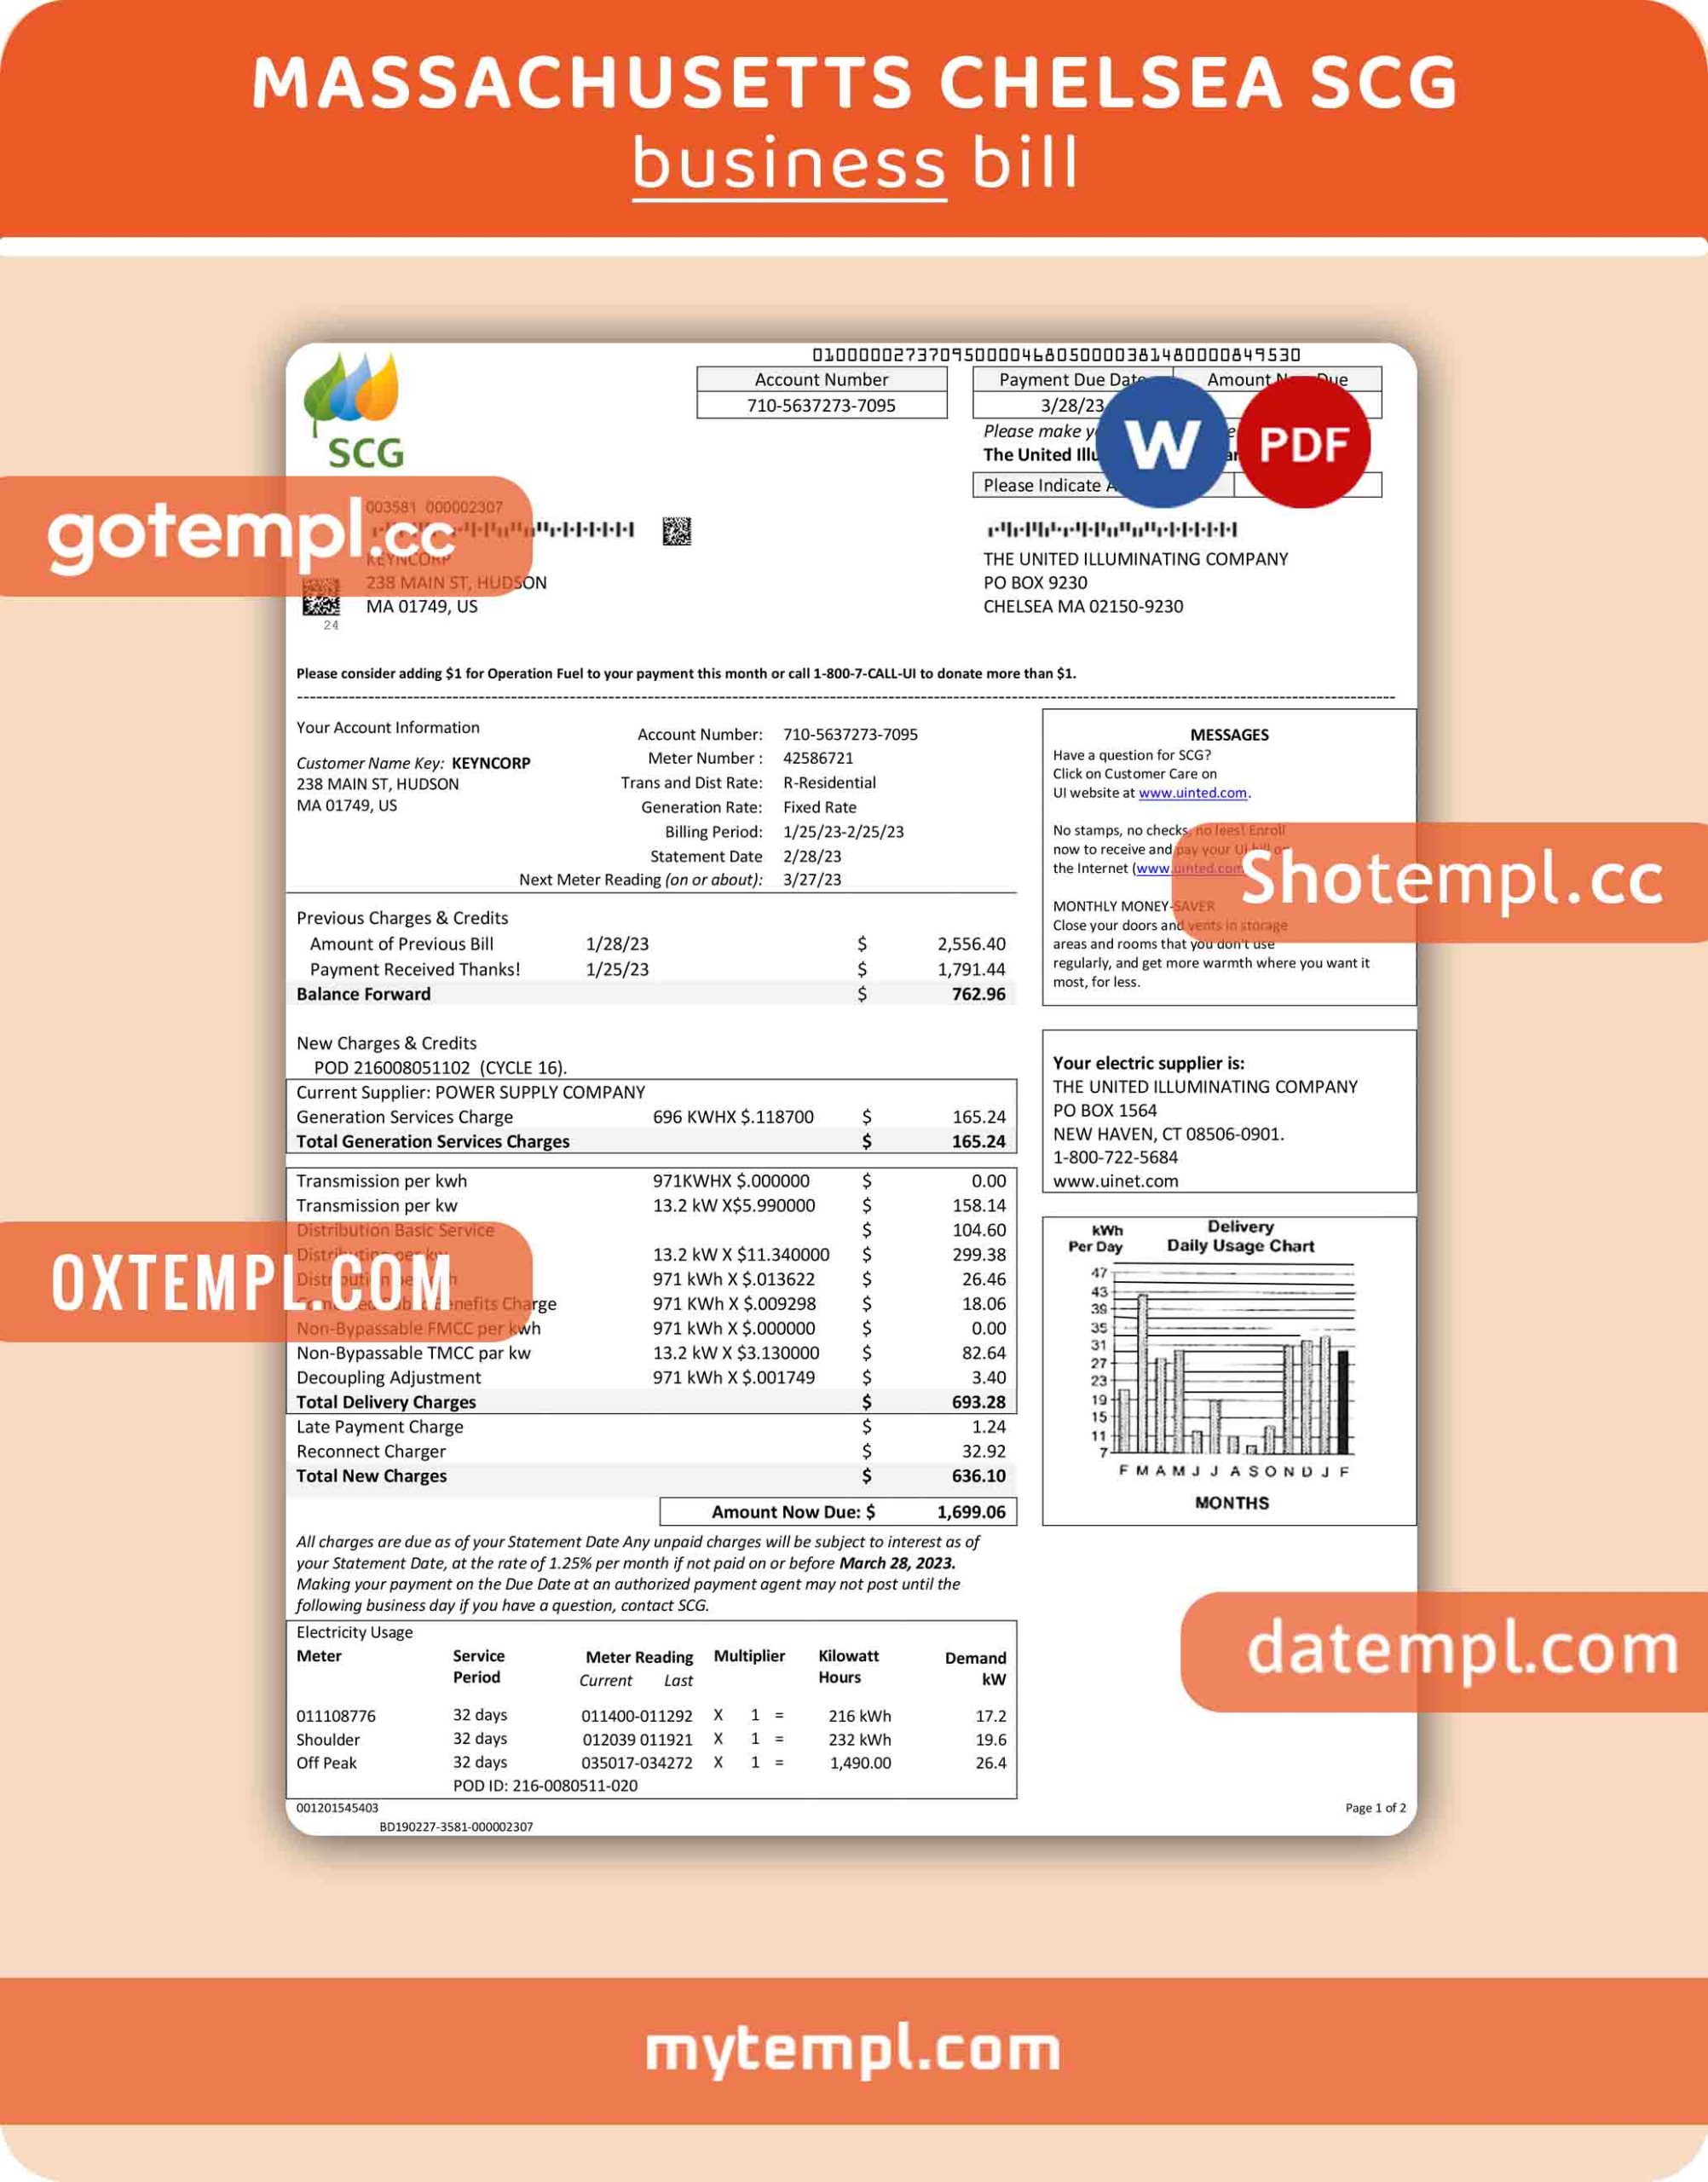 Sao Tome and Principe marriage certificate Word and PDF template, fully editable